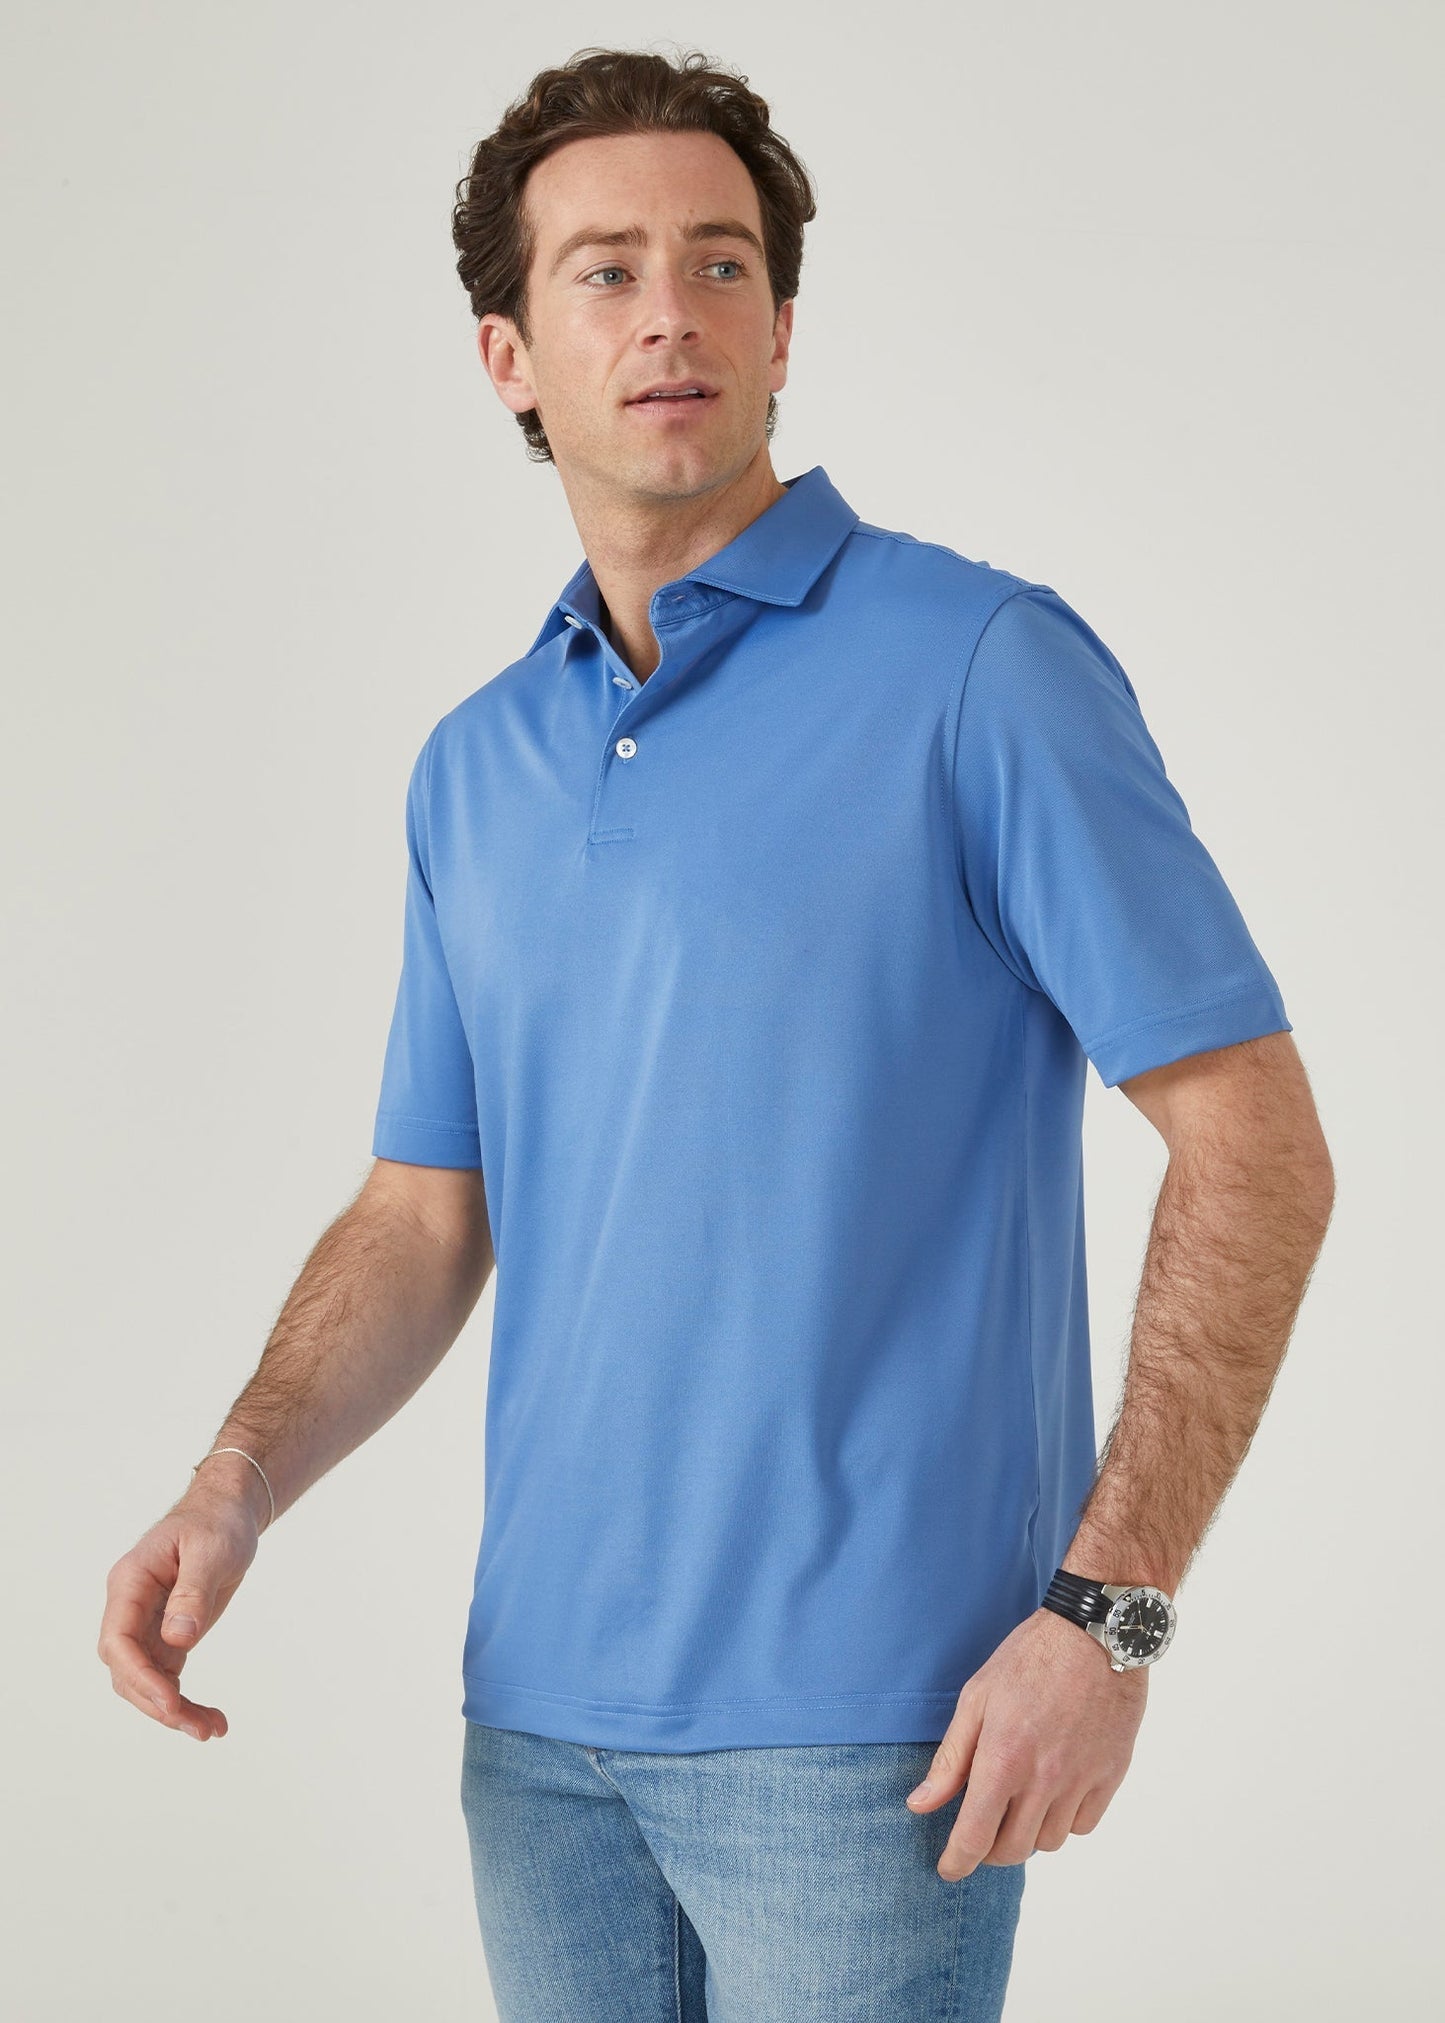 Men's 3 button polo shirt in mid blue.